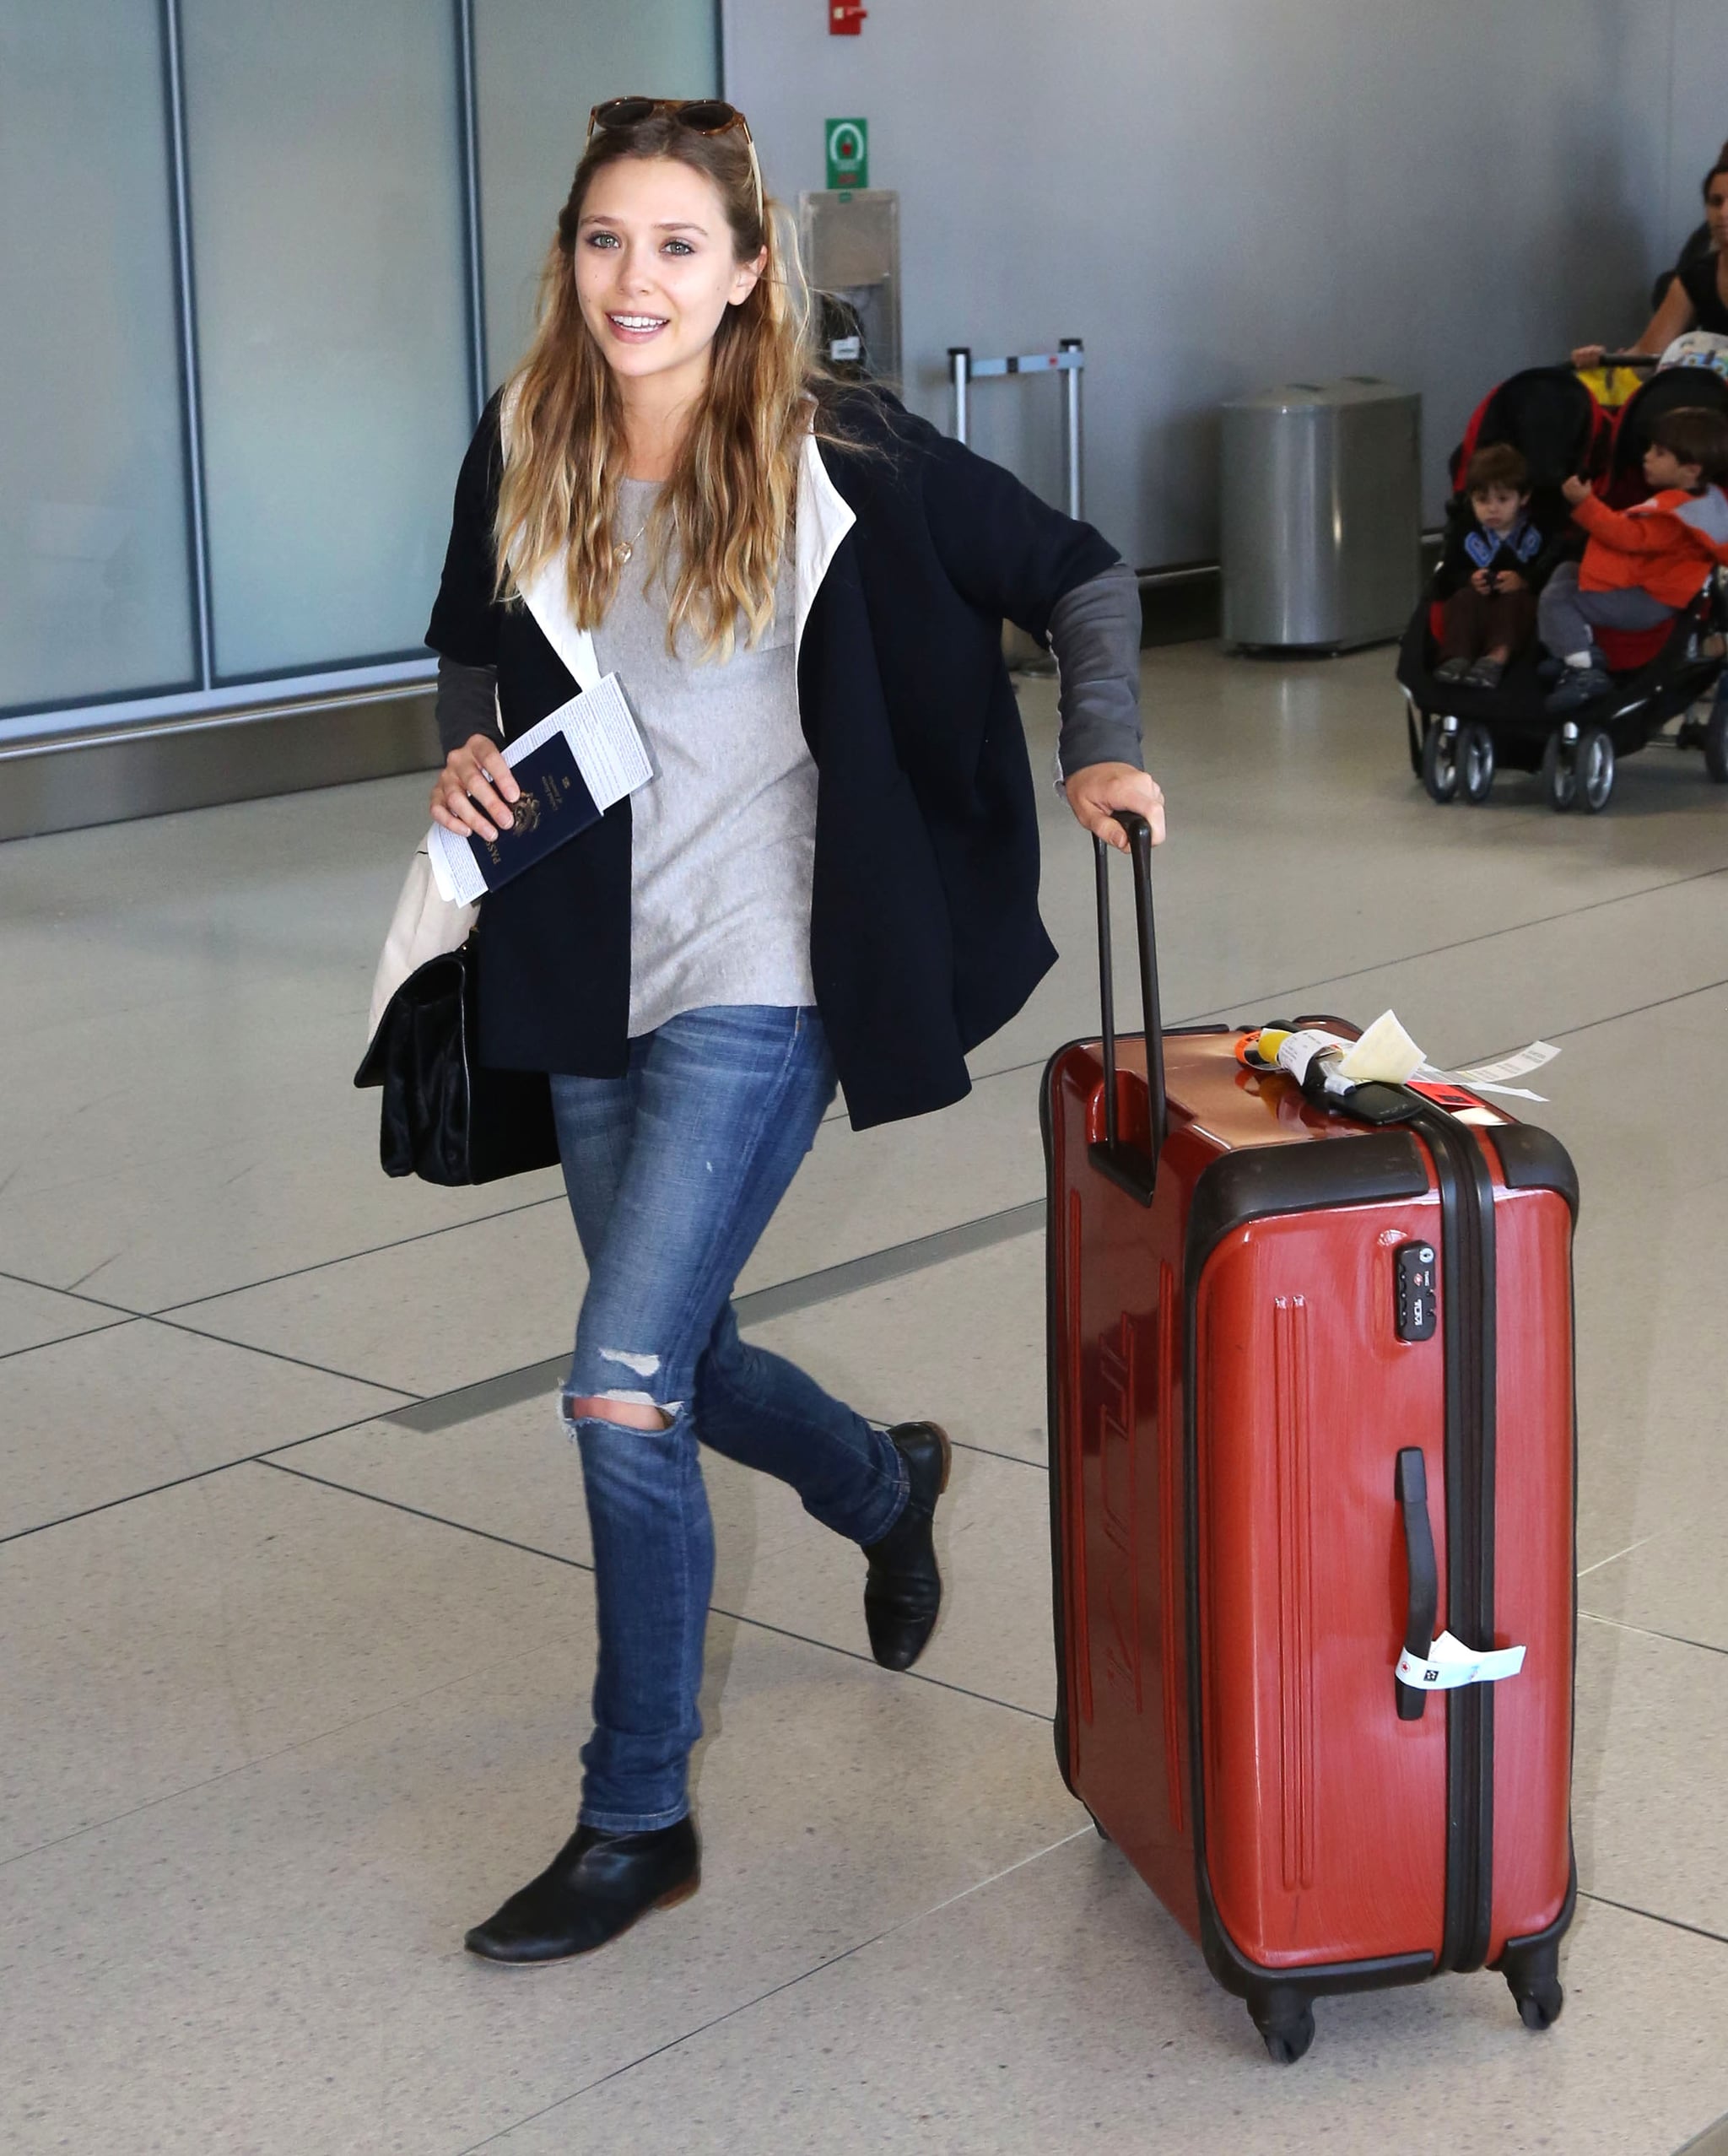 Elizabeth Olsen also arrived in looking comfy ripped denim | 91 Style Tips to From the Airport's Best Dressed Celebs | POPSUGAR Fashion Photo 53